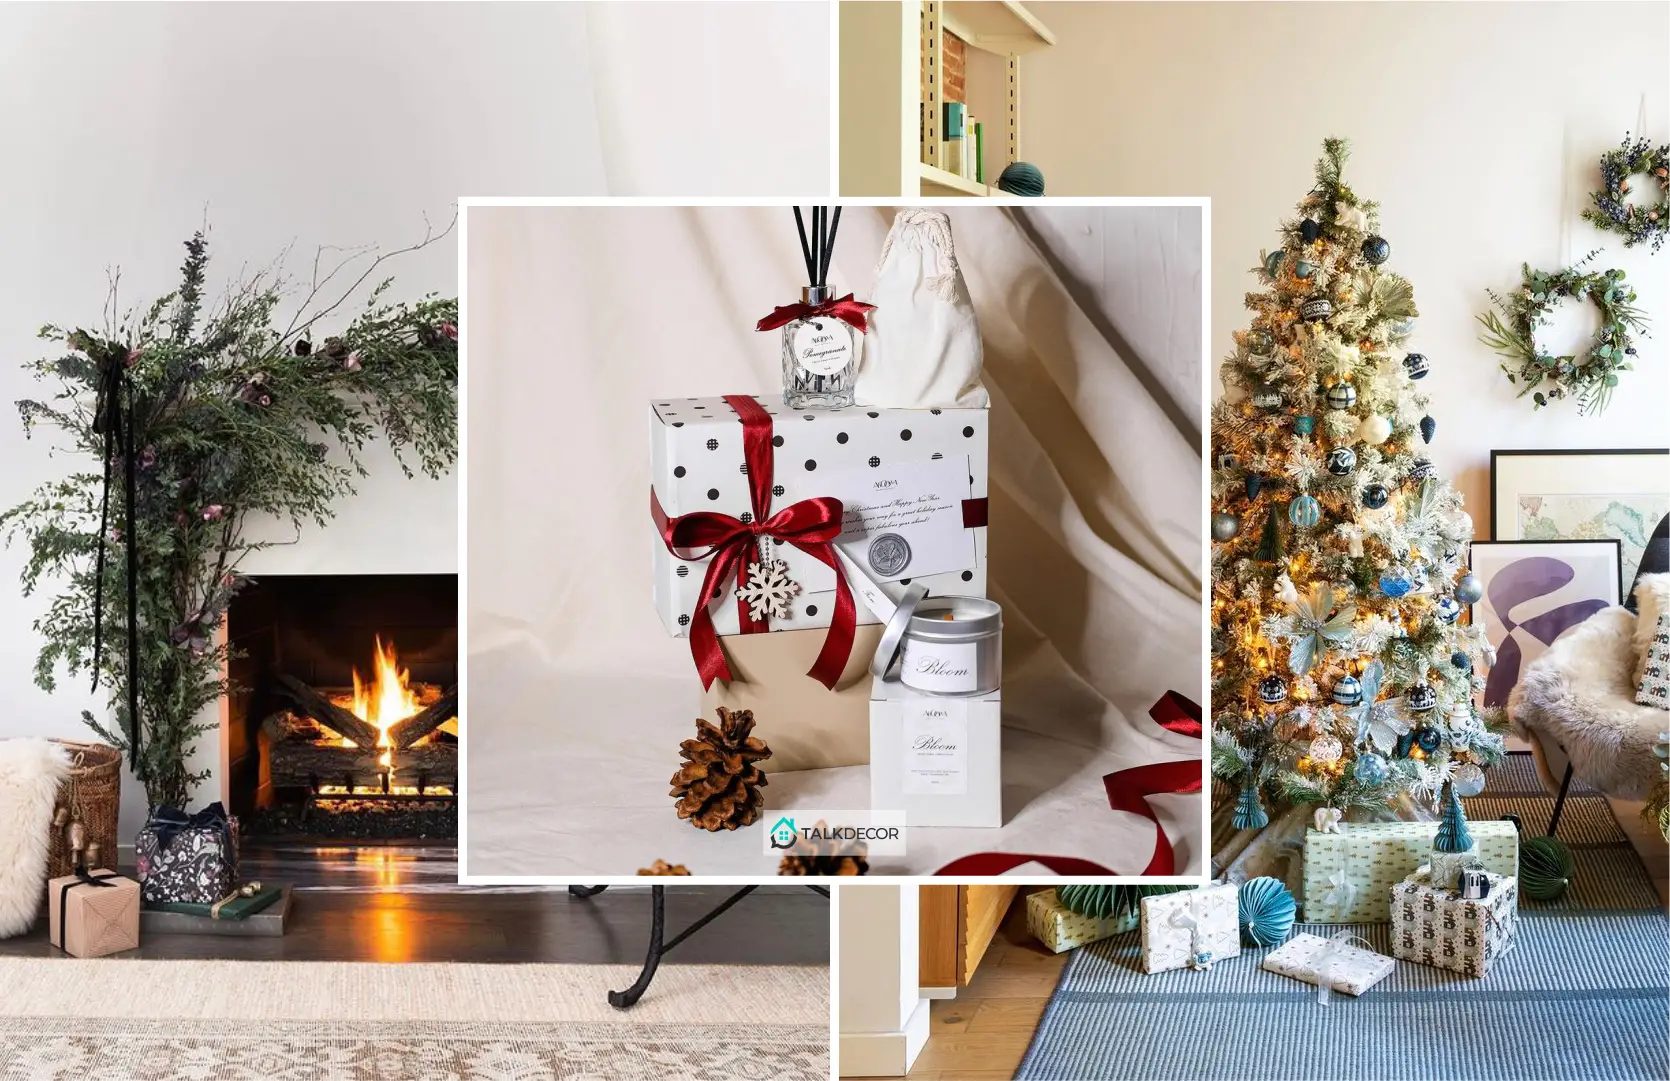 25 Simple Christmas Decorating Ideas That Easy to Copy